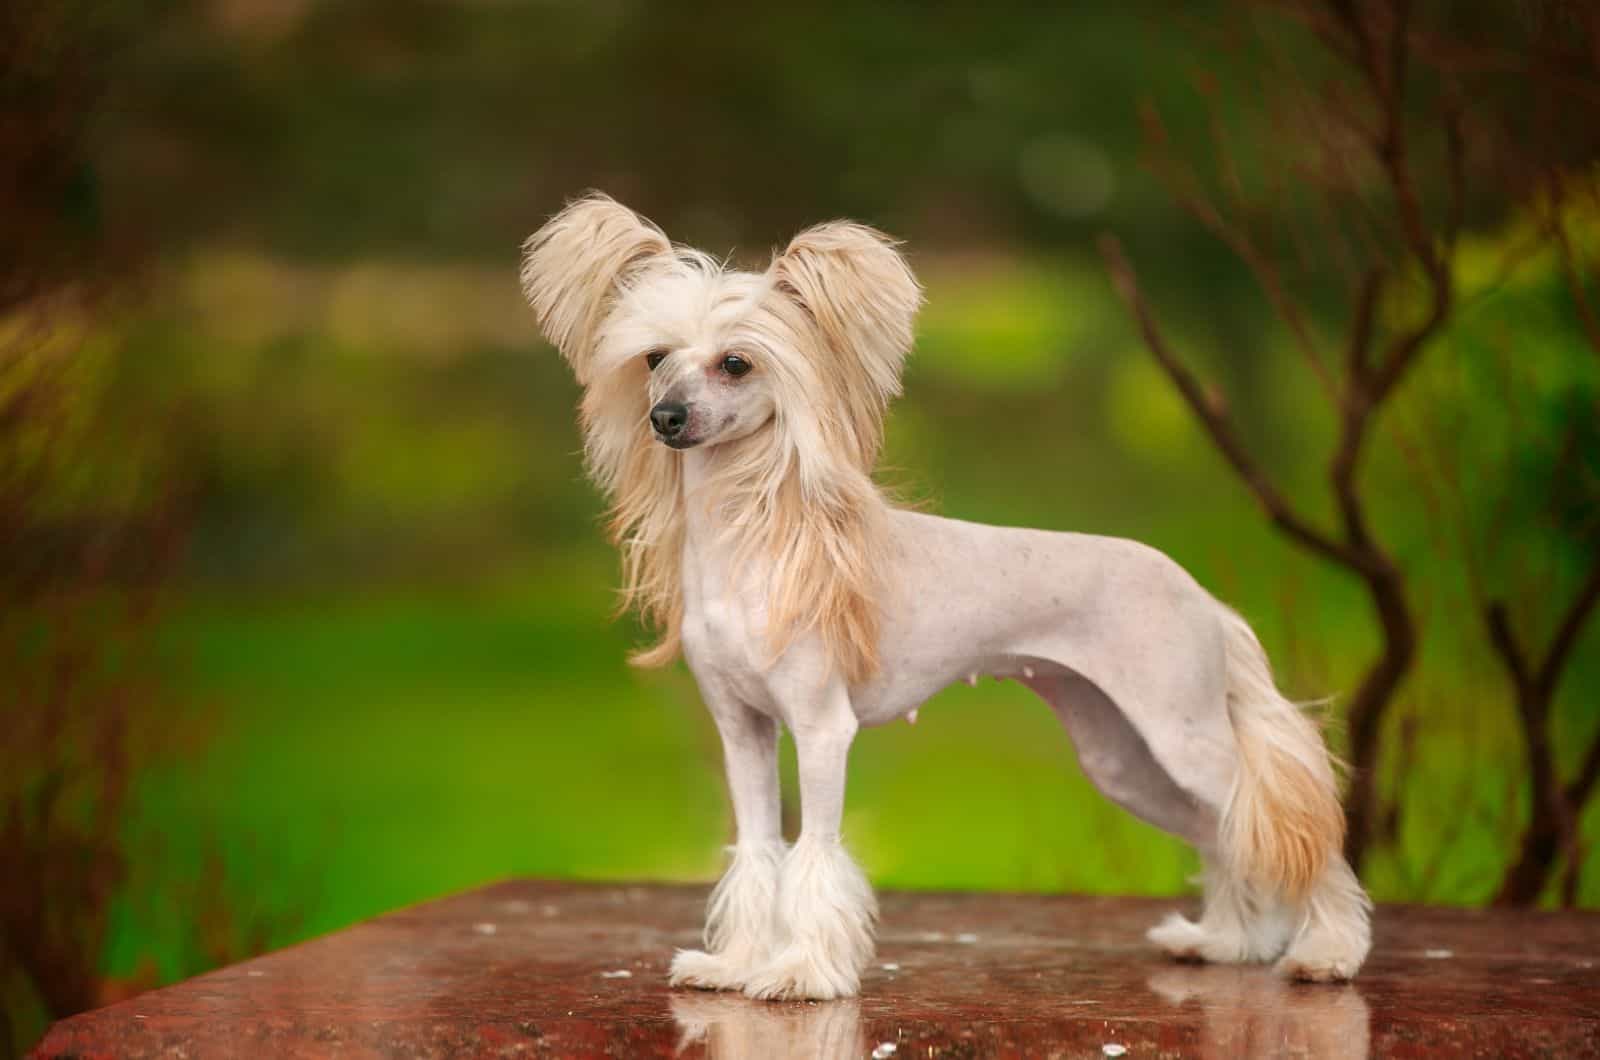 7 Chinese Crested Breeders: Finding The Dr.Seuss Dog